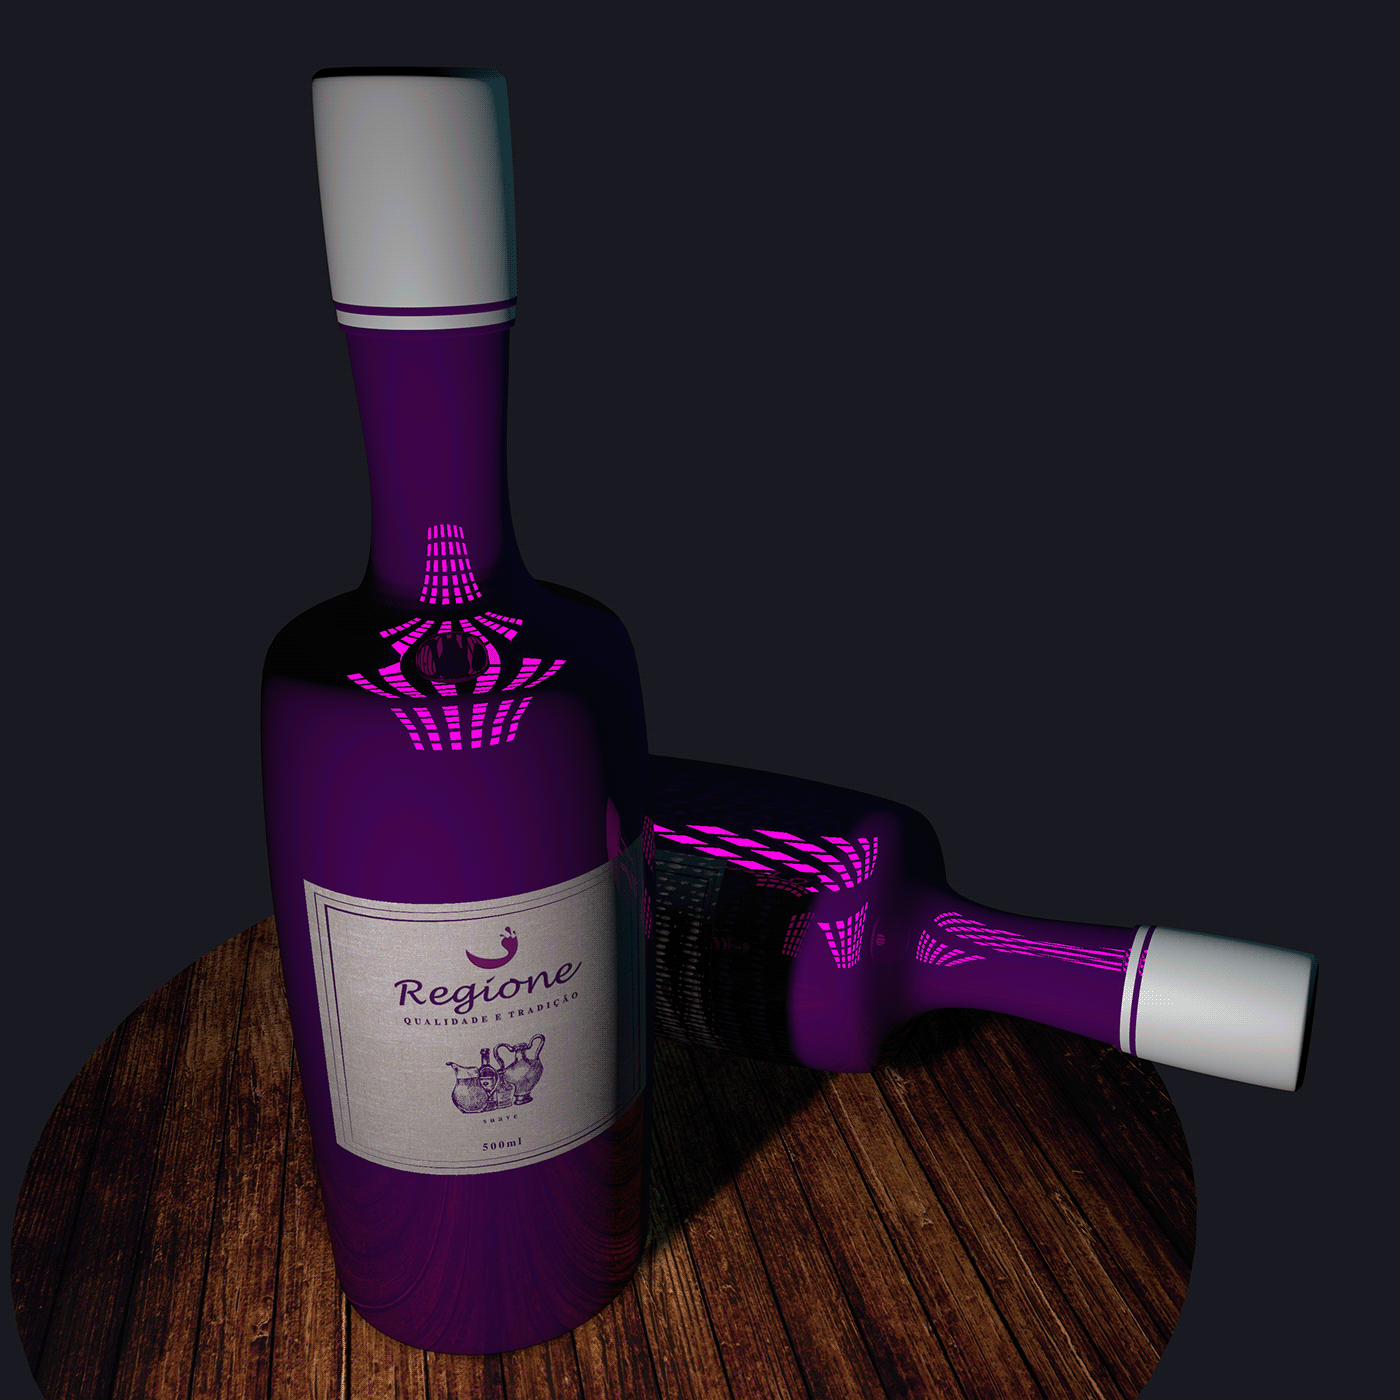 Image may contain: purple, bottle and indoor